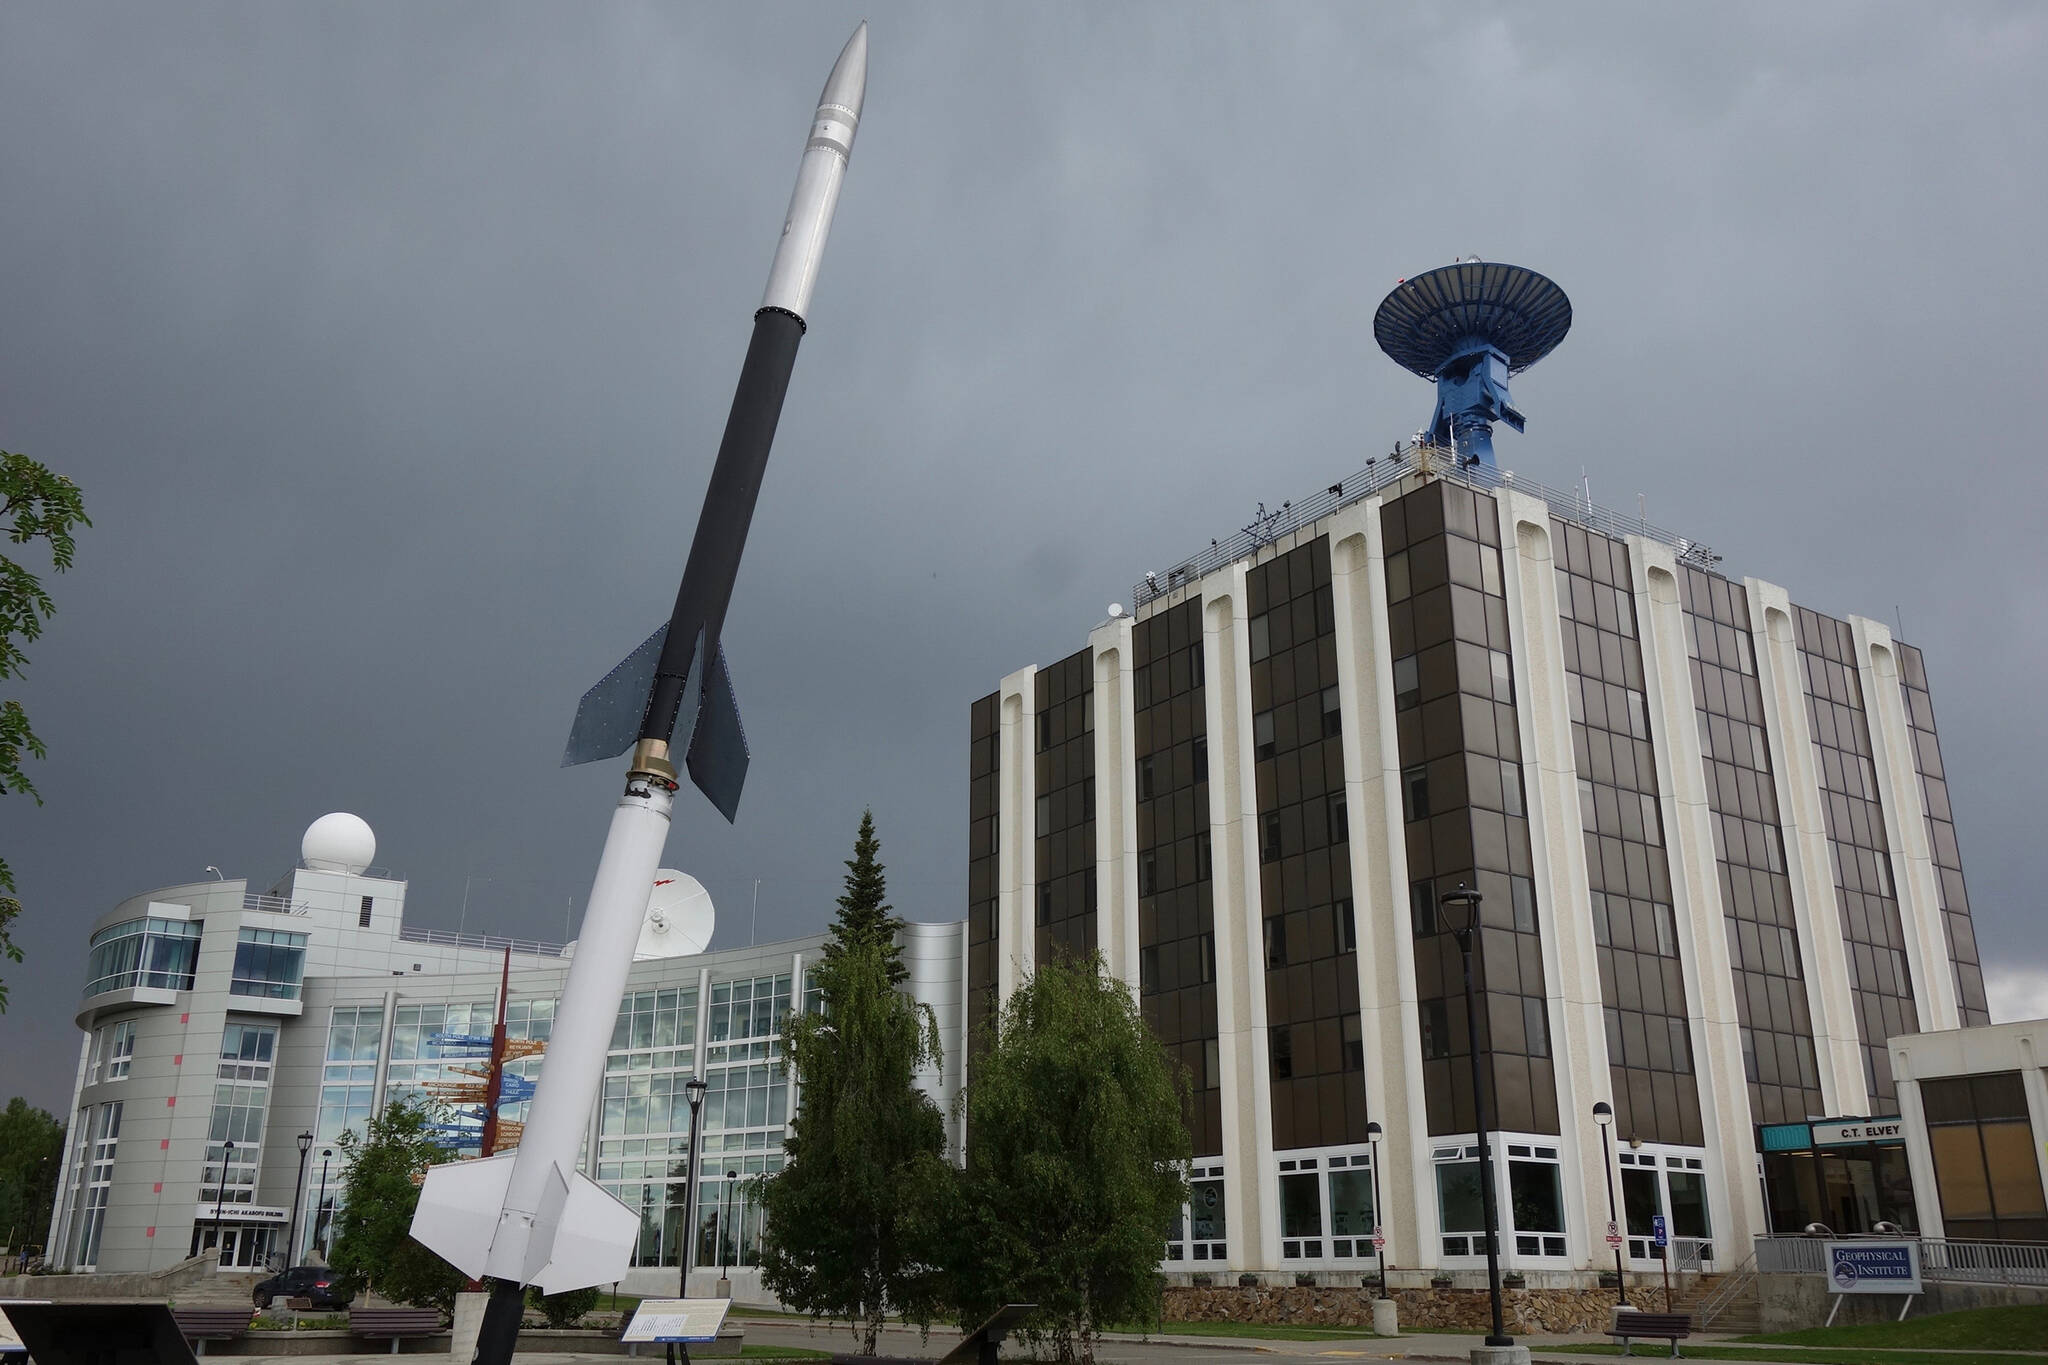 The Elvey Building (with the satellite dish on top), home to the Geophysical Institute on the UAF campus. (Courtesy Photo / Ned Rozell)